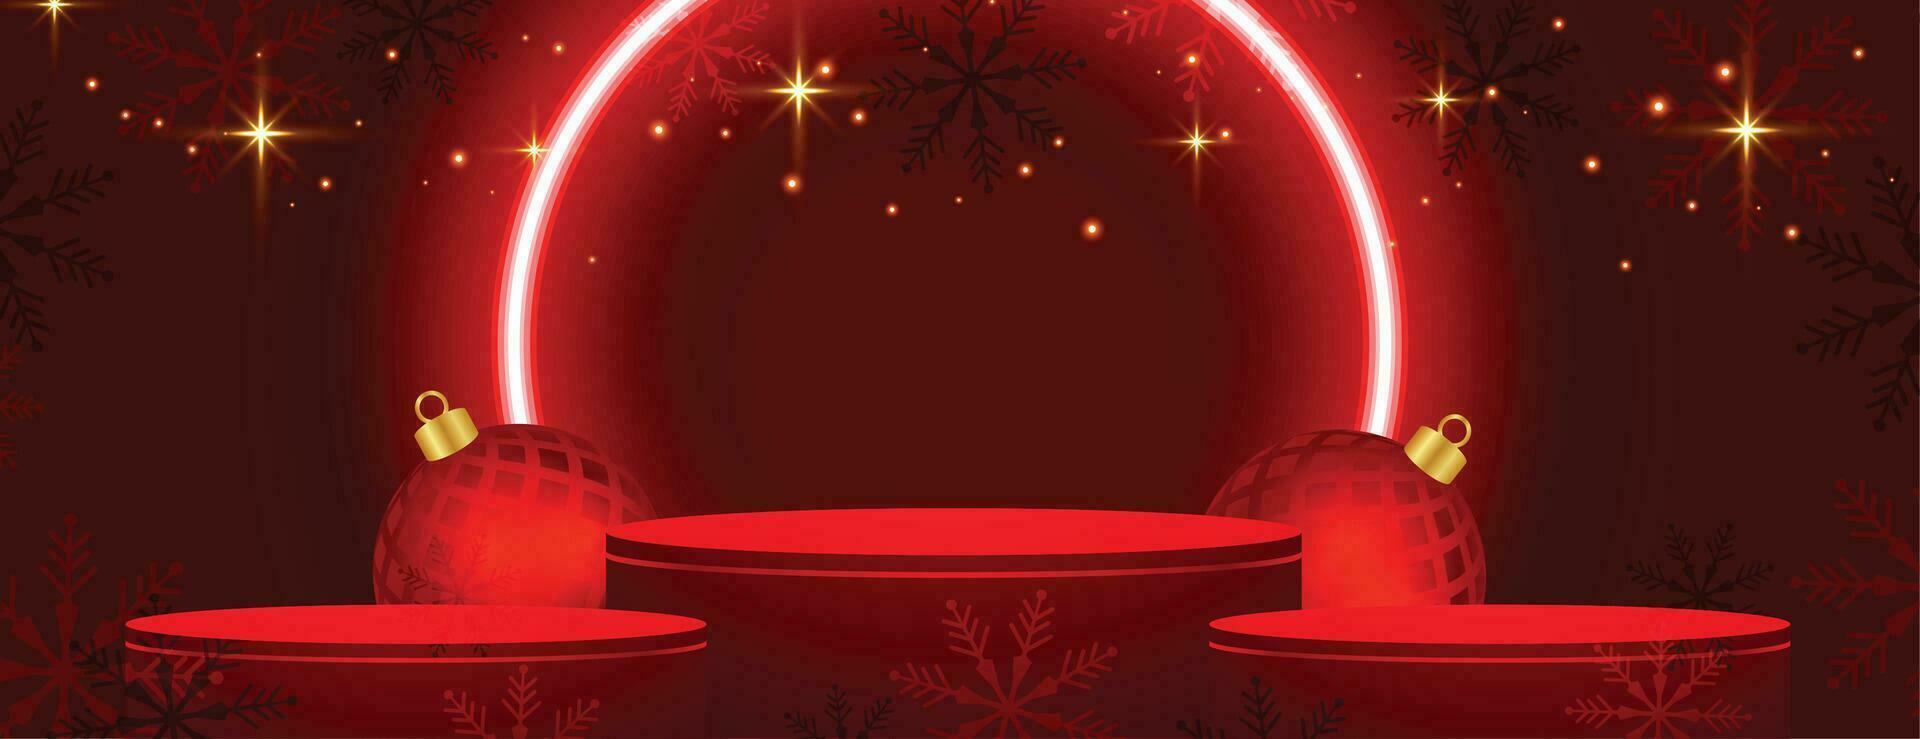 neon style merry christmas red banner with 3d podium and bauble vector